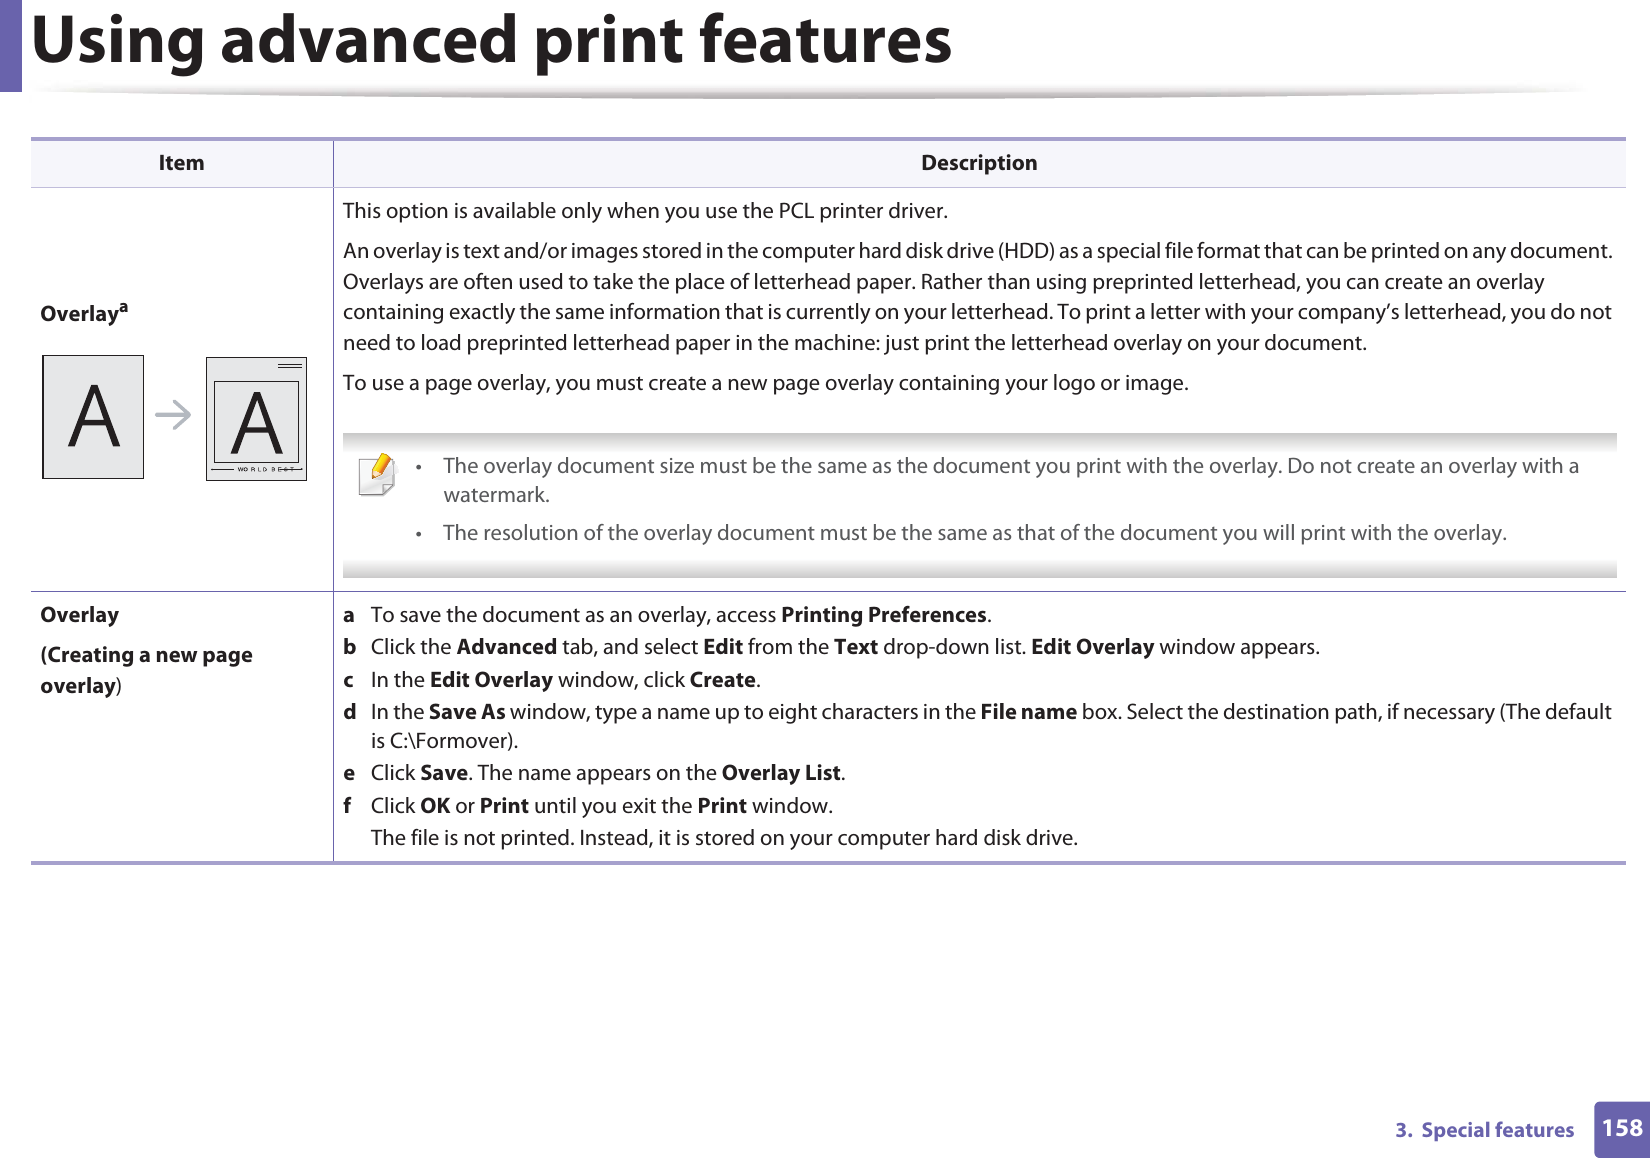 Using advanced print features1583.  Special featuresOverlayaThis option is available only when you use the PCL printer driver.An overlay is text and/or images stored in the computer hard disk drive (HDD) as a special file format that can be printed on any document. Overlays are often used to take the place of letterhead paper. Rather than using preprinted letterhead, you can create an overlay containing exactly the same information that is currently on your letterhead. To print a letter with your company’s letterhead, you do not need to load preprinted letterhead paper in the machine: just print the letterhead overlay on your document.To use a page overlay, you must create a new page overlay containing your logo or image. • The overlay document size must be the same as the document you print with the overlay. Do not create an overlay with a watermark.• The resolution of the overlay document must be the same as that of the document you will print with the overlay. Overlay(Creating a new page overlay)a  To save the document as an overlay, access Printing Preferences.b  Click the Advanced tab, and select Edit from the Text drop-down list. Edit Overlay window appears.c  In the Edit Overlay window, click Create. d  In the Save As window, type a name up to eight characters in the File name box. Select the destination path, if necessary (The default is C:\Formover).e  Click Save. The name appears on the Overlay List. f  Click OK or Print until you exit the Print window.The file is not printed. Instead, it is stored on your computer hard disk drive.Item Description